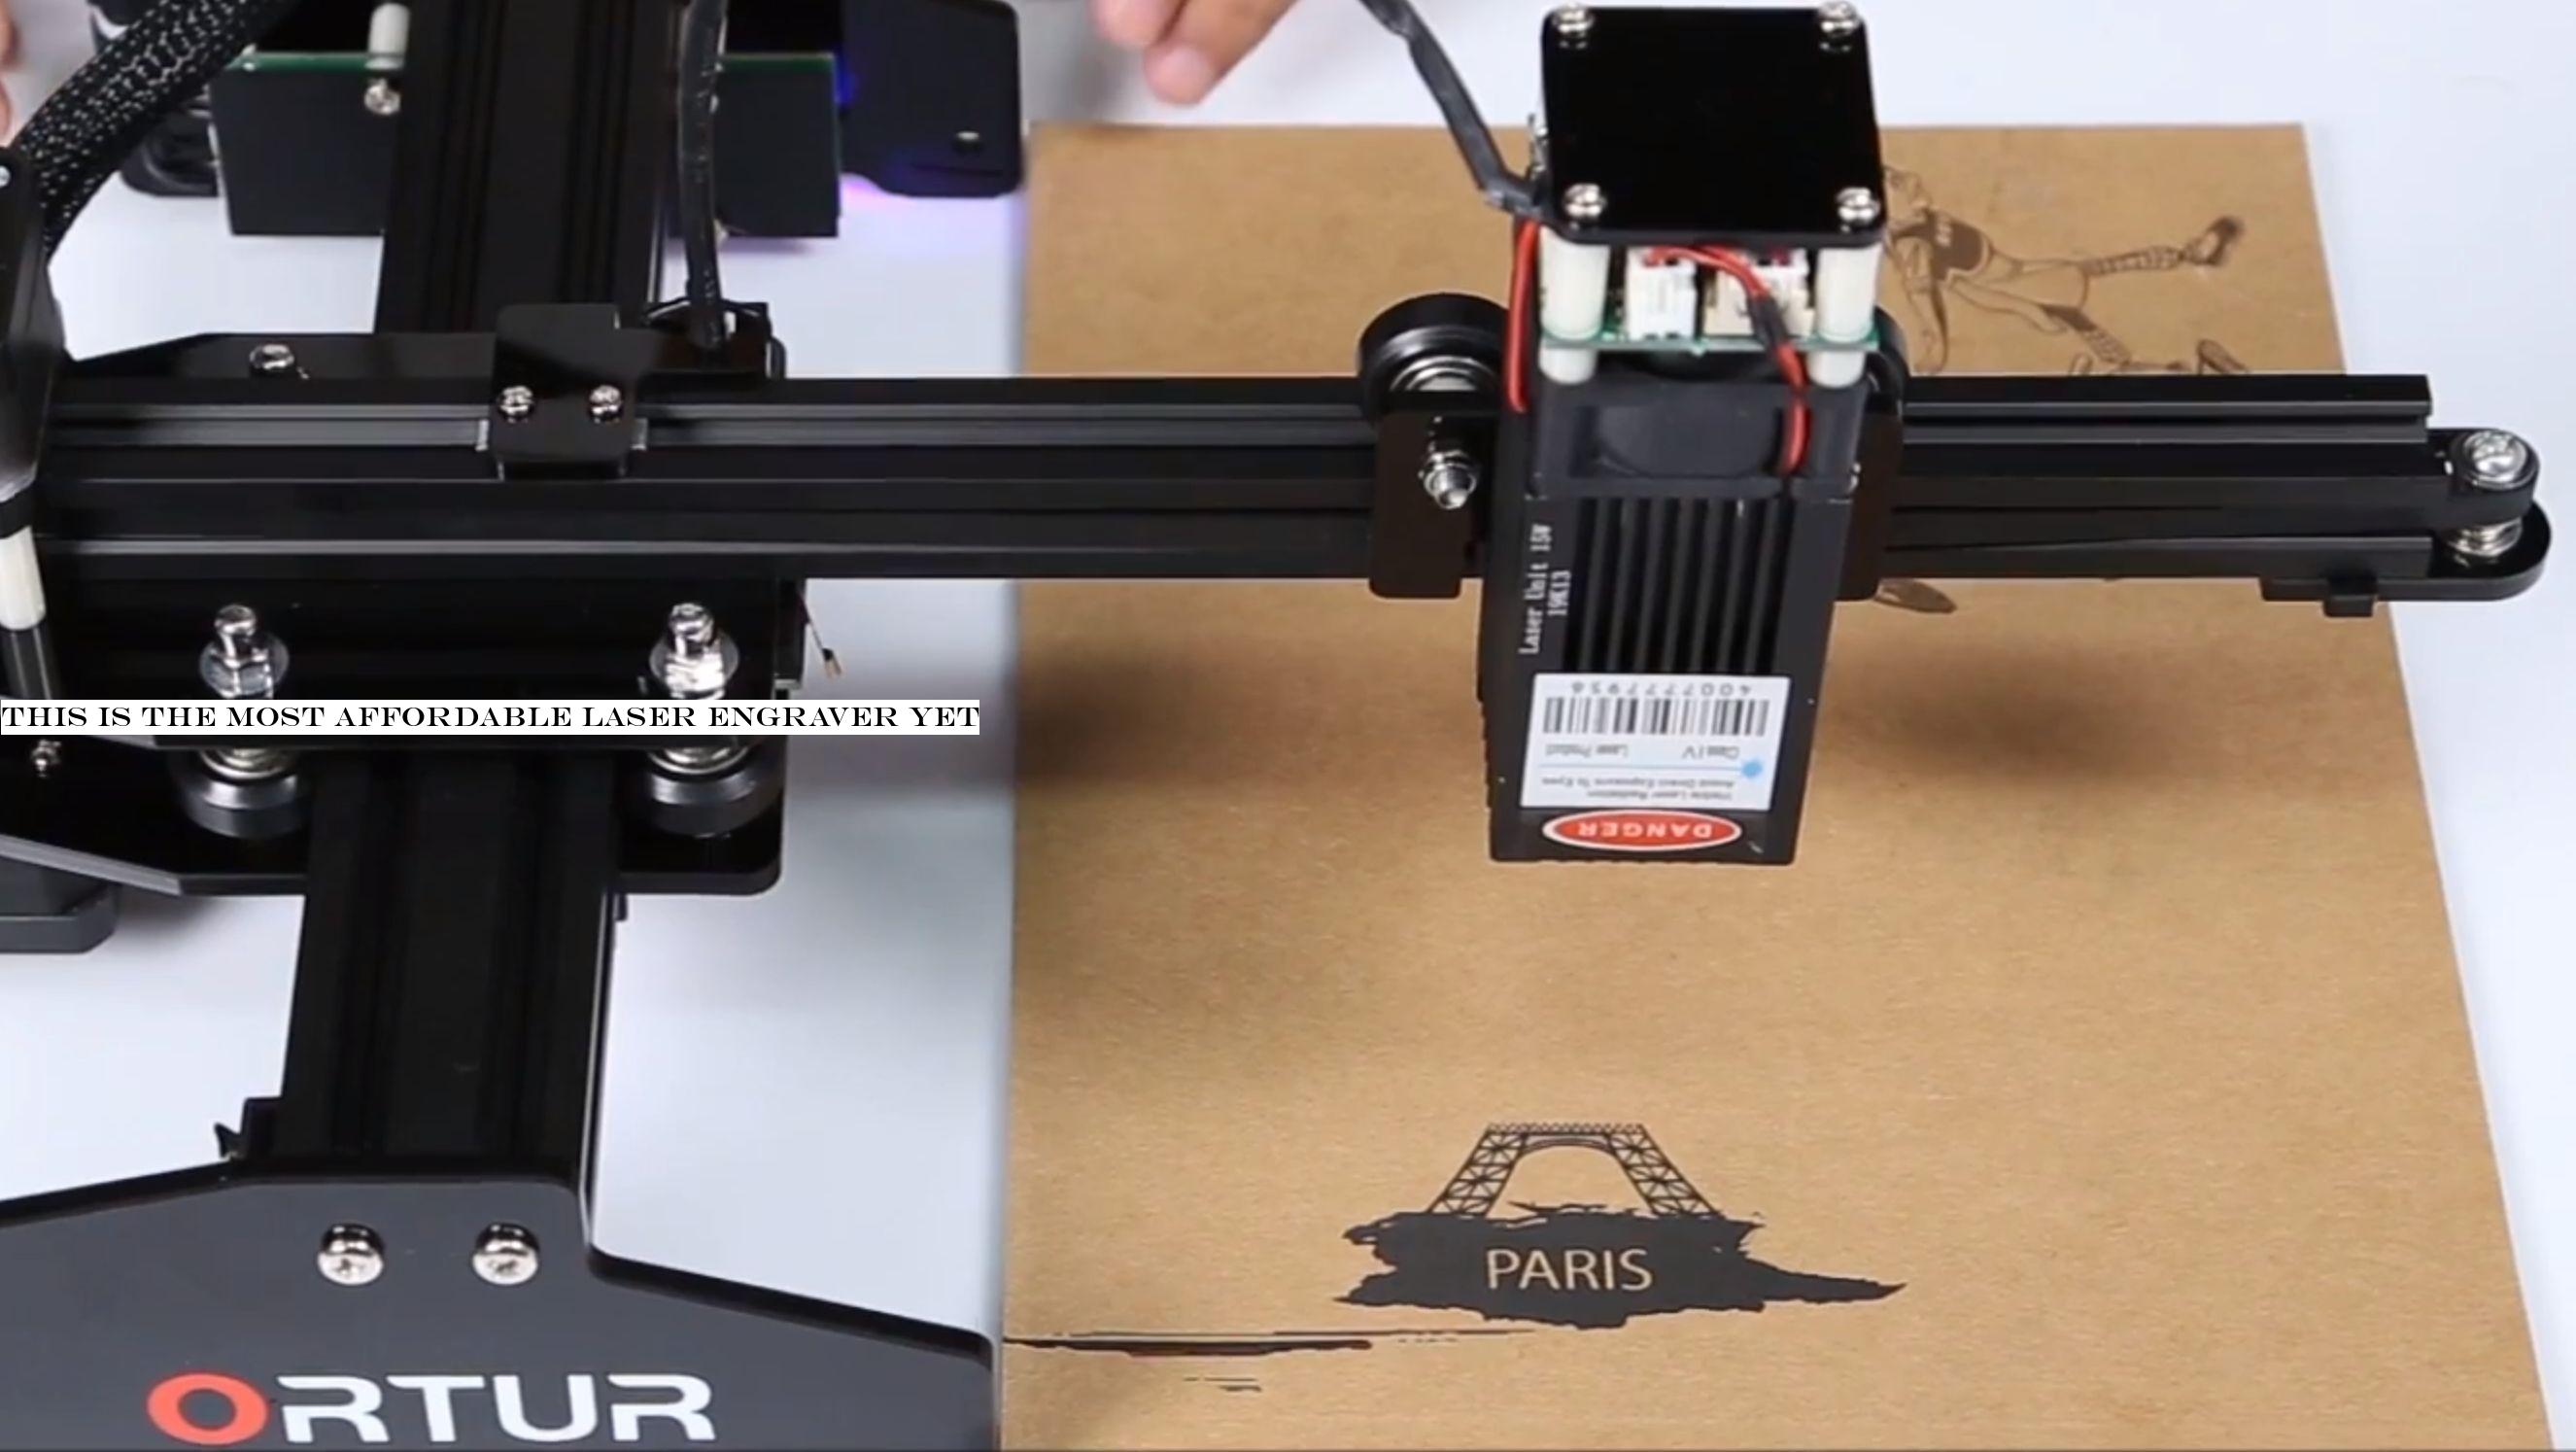 This is the most affordable laser engraver yet